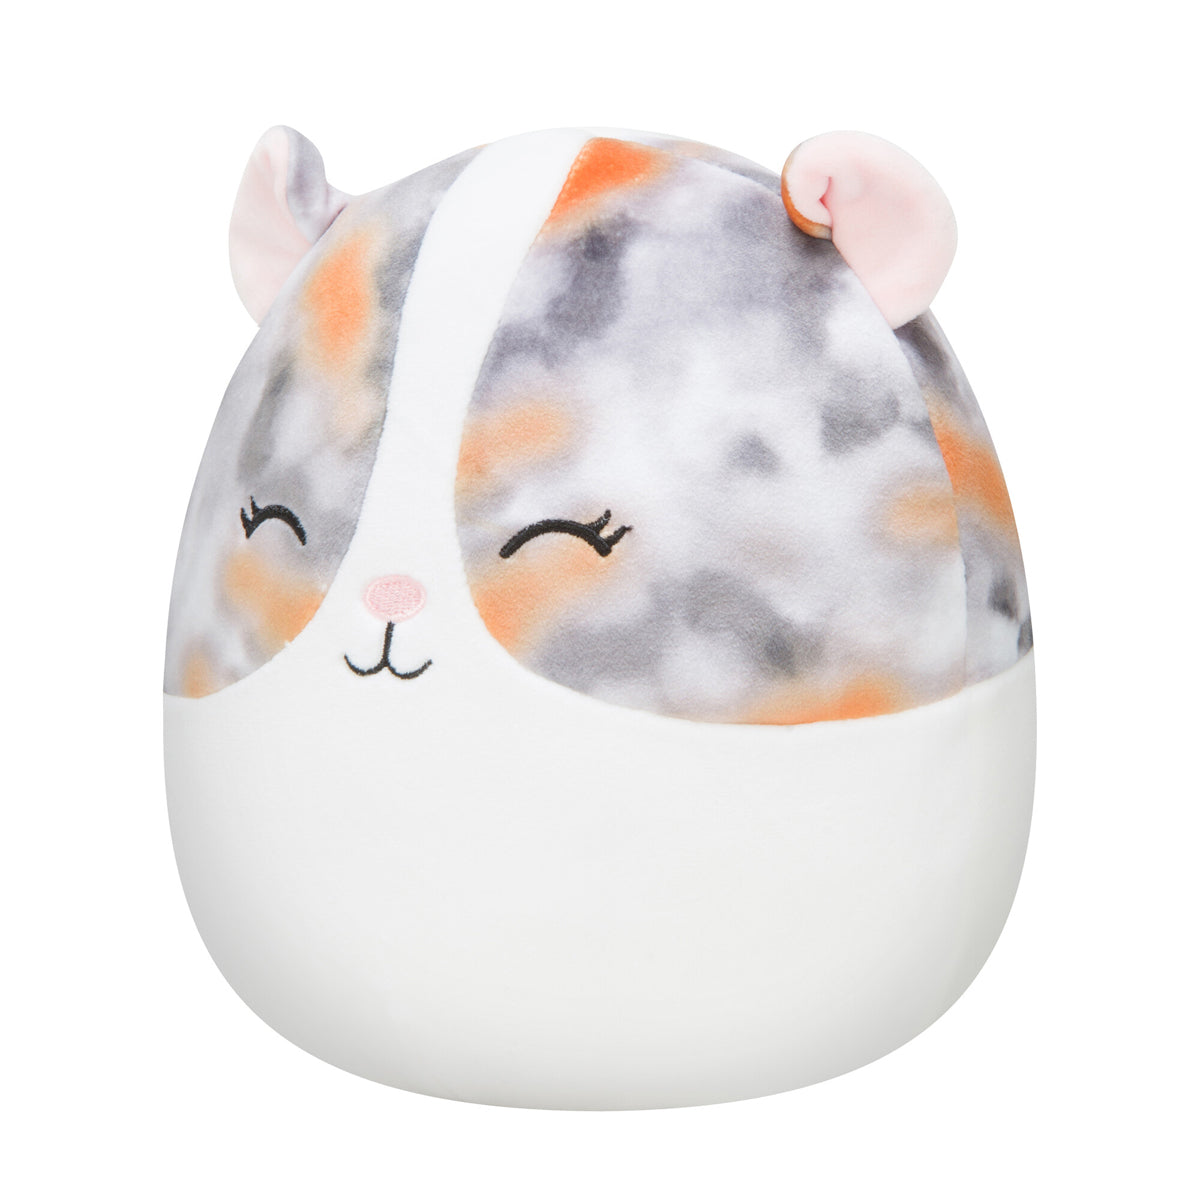 Squishmallows 7.5' Soft Toy - Pax the Hamster